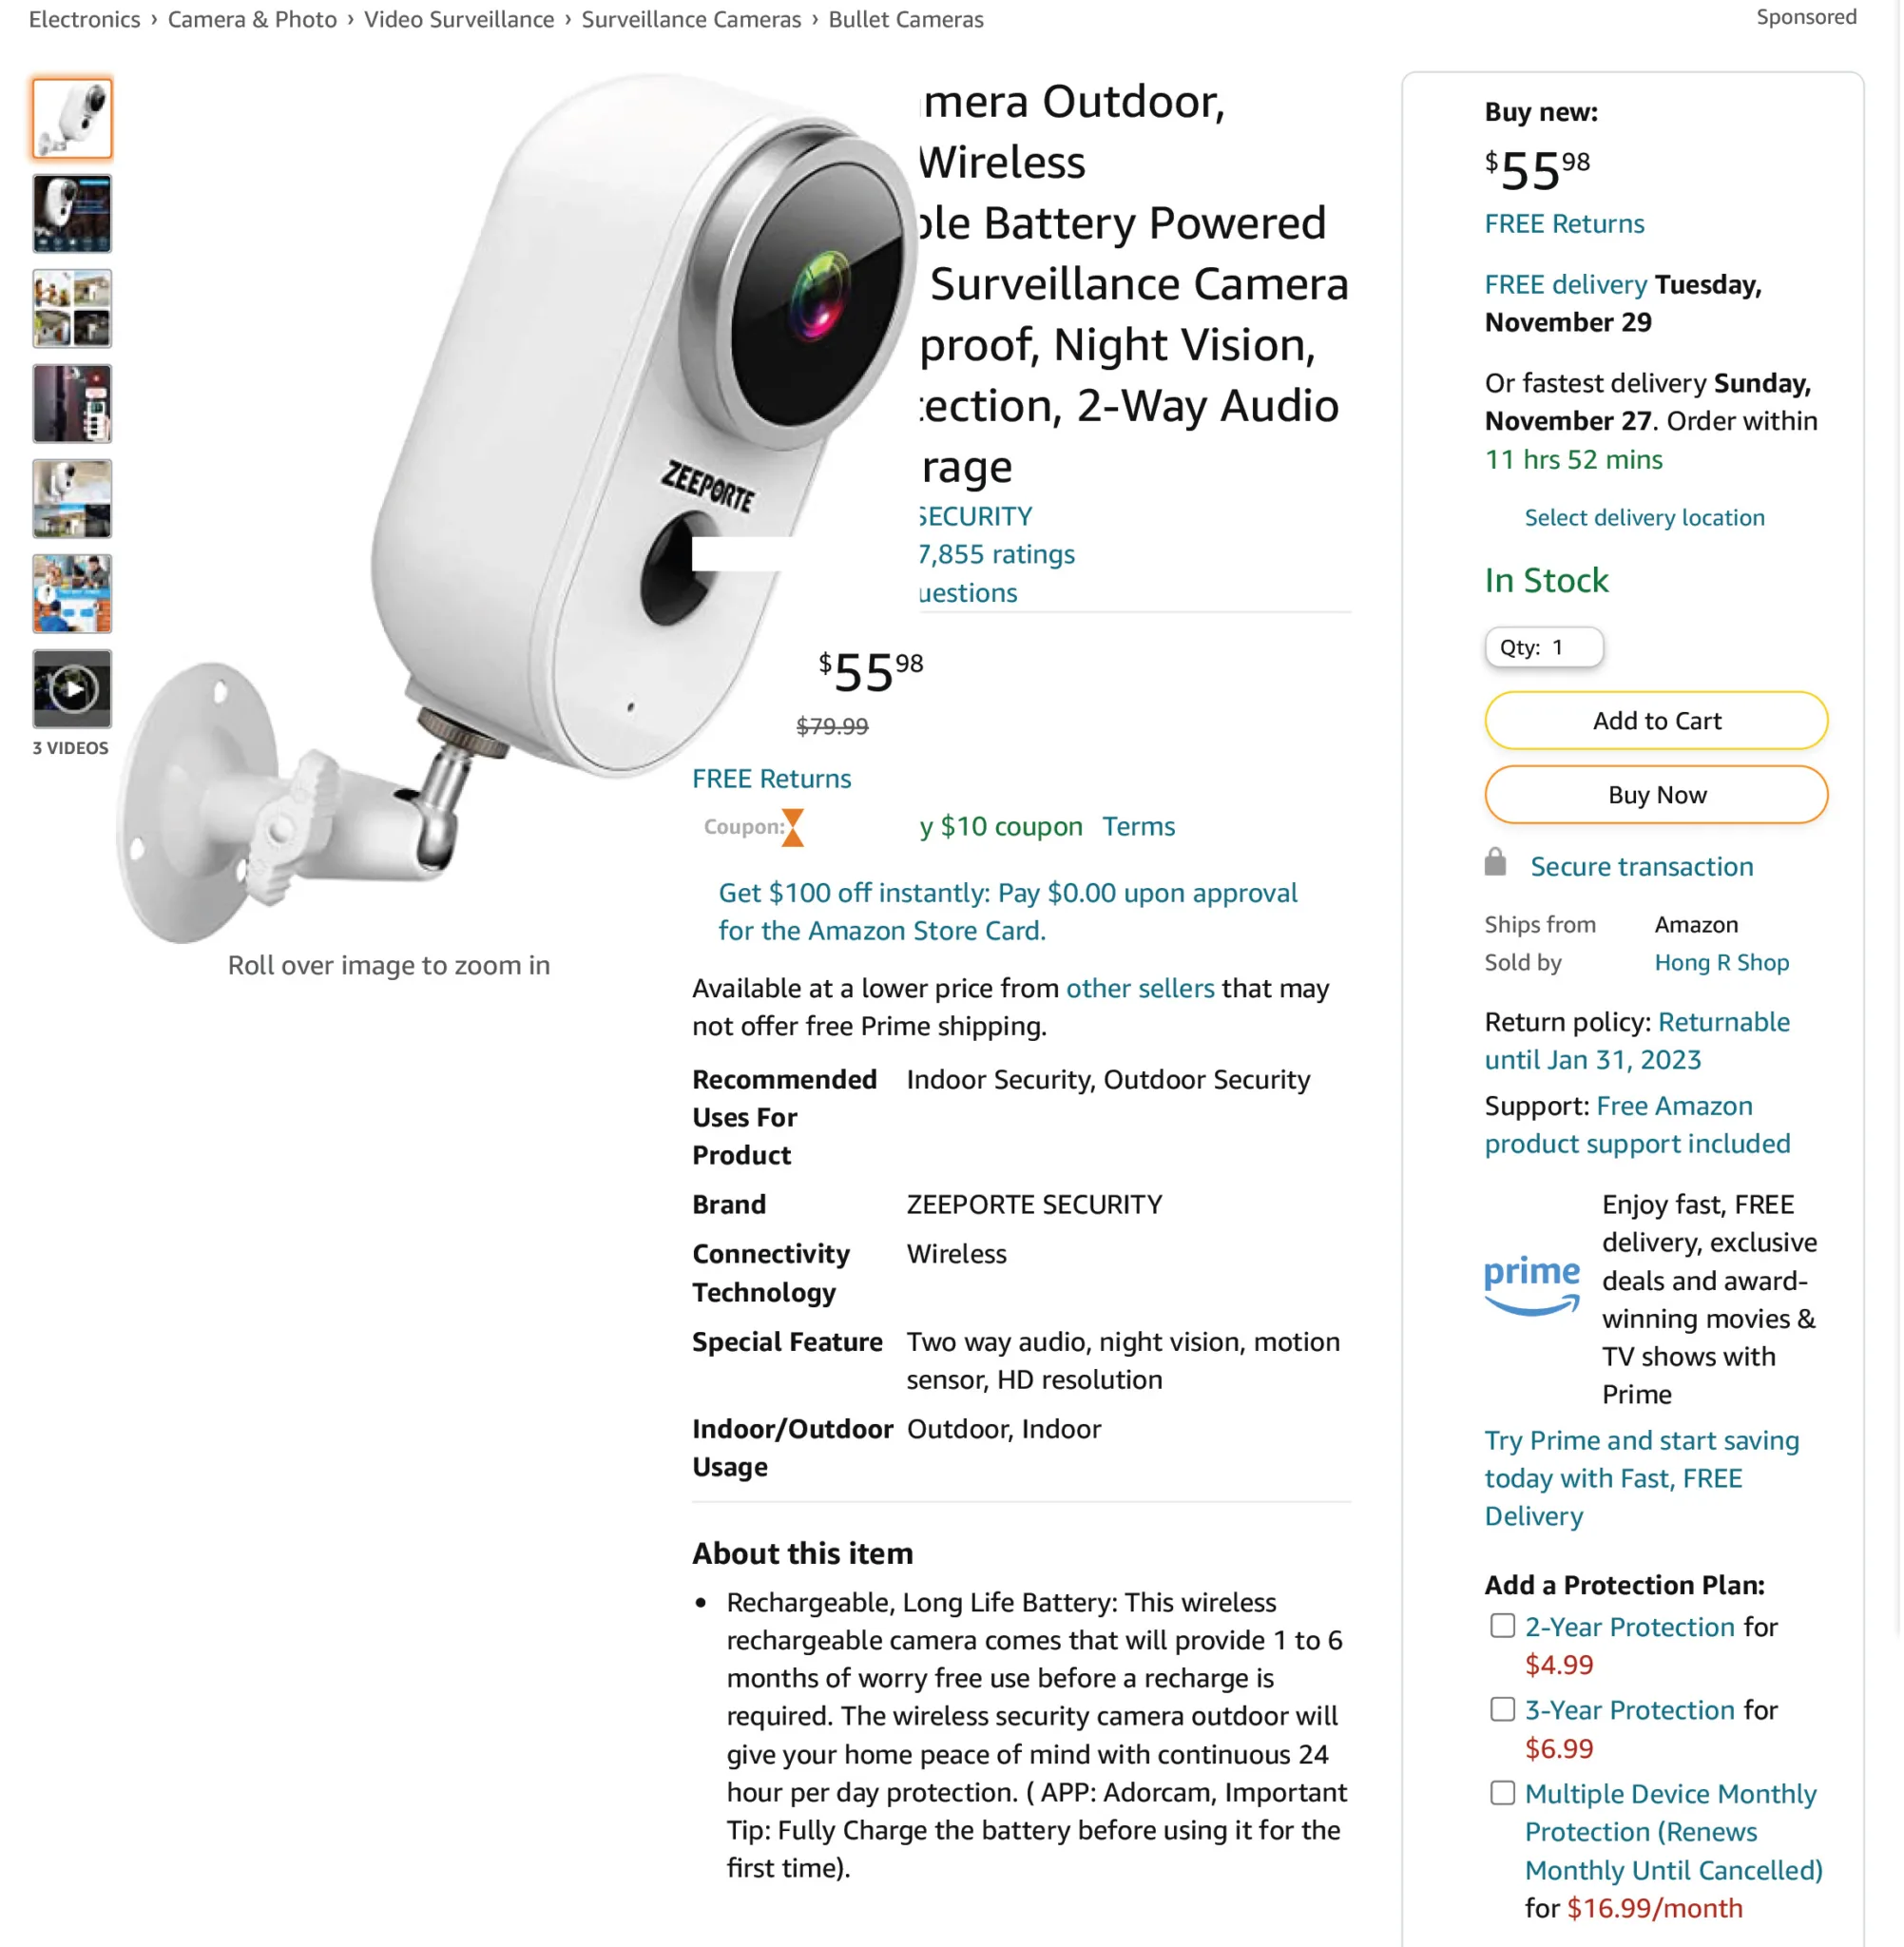 Wireless security cameras from Amazon